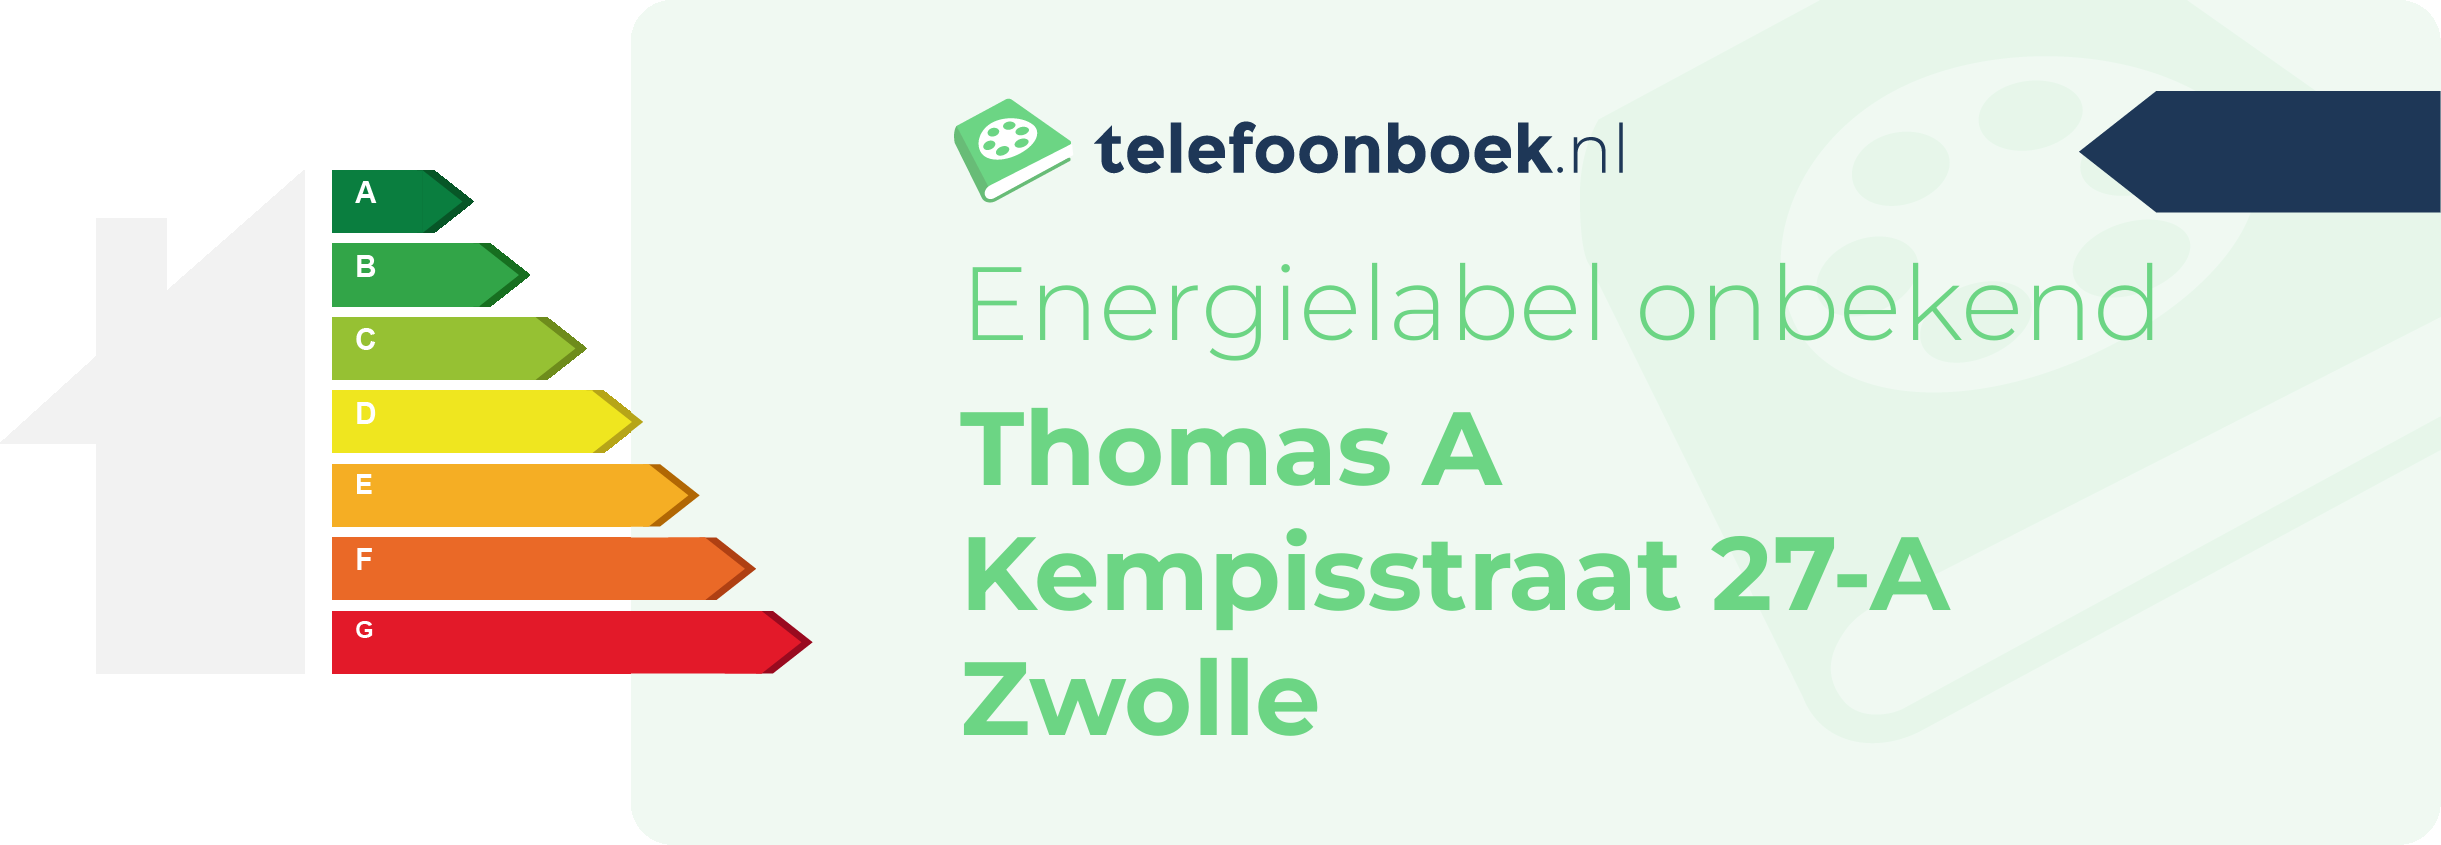 Energielabel Thomas A Kempisstraat 27-A Zwolle